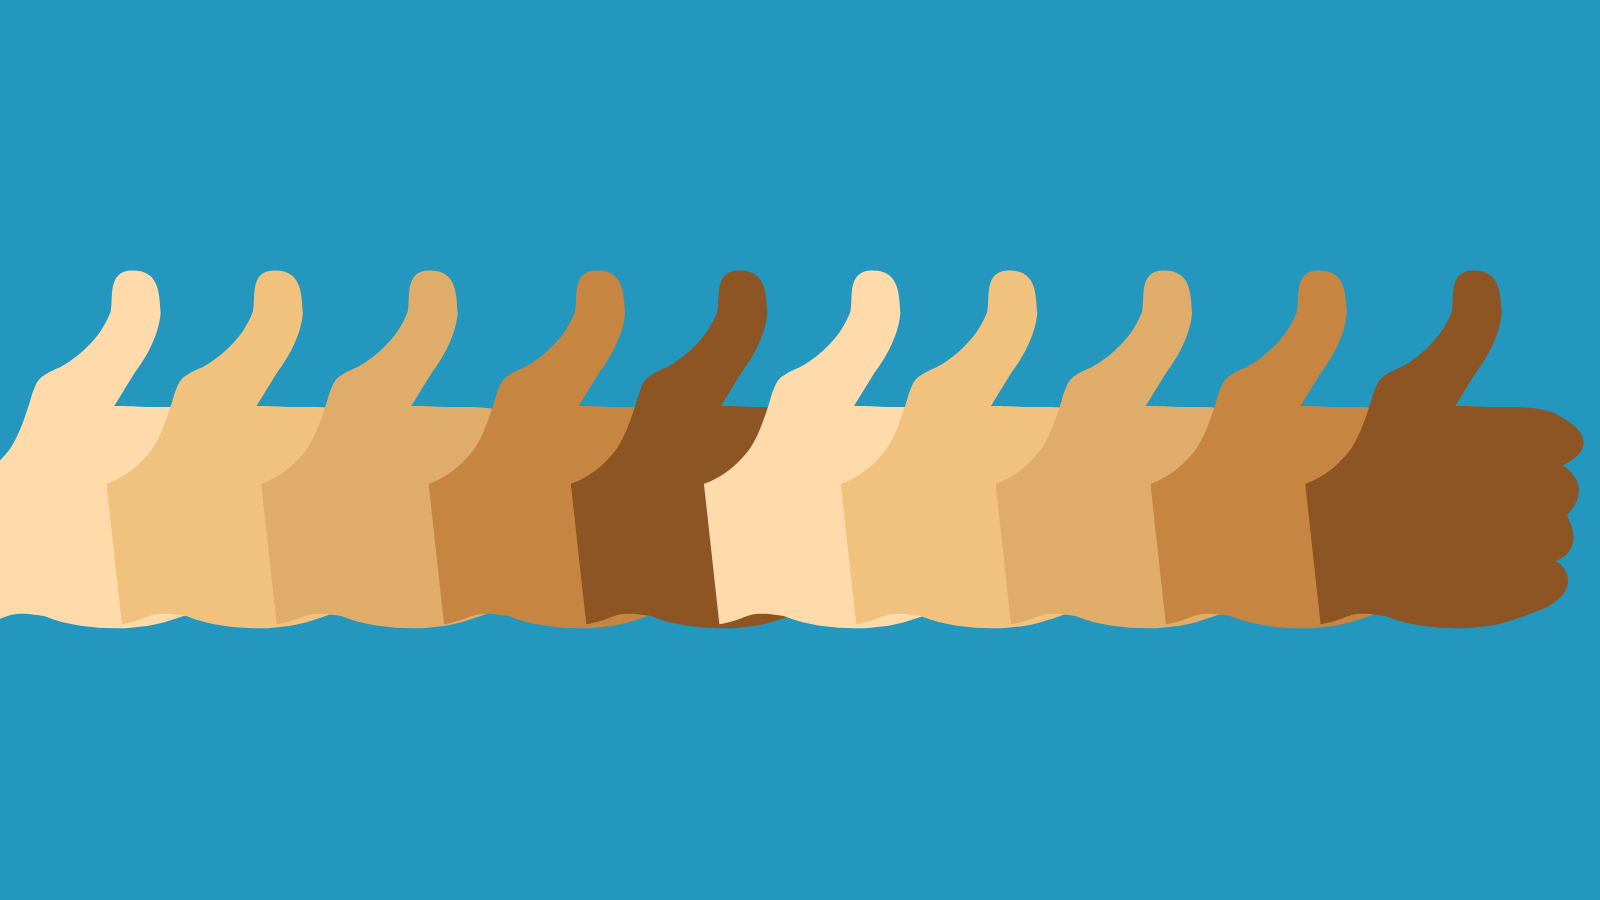 A thumbs up icon in various skin tones